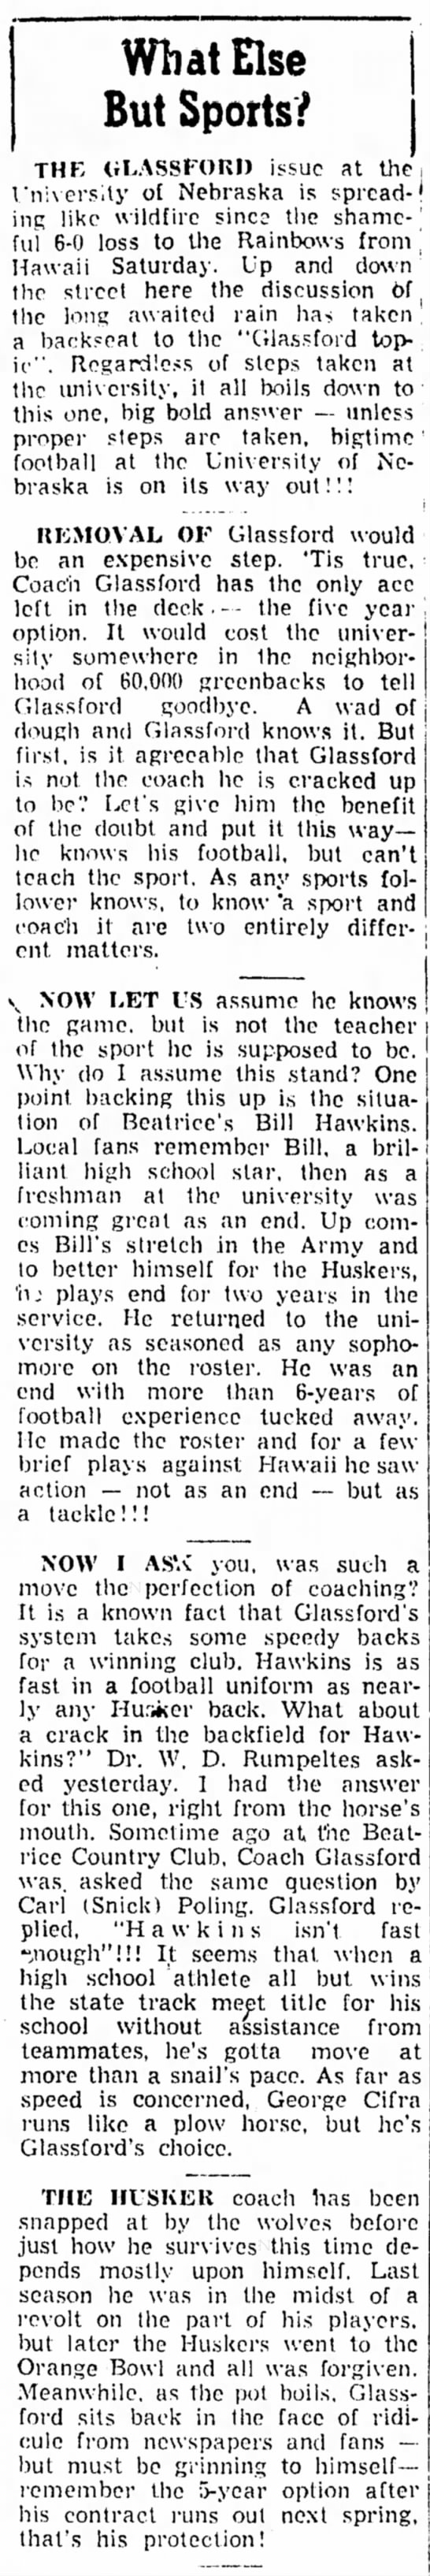 1955 Hawaii, postgame commentary 2 - 